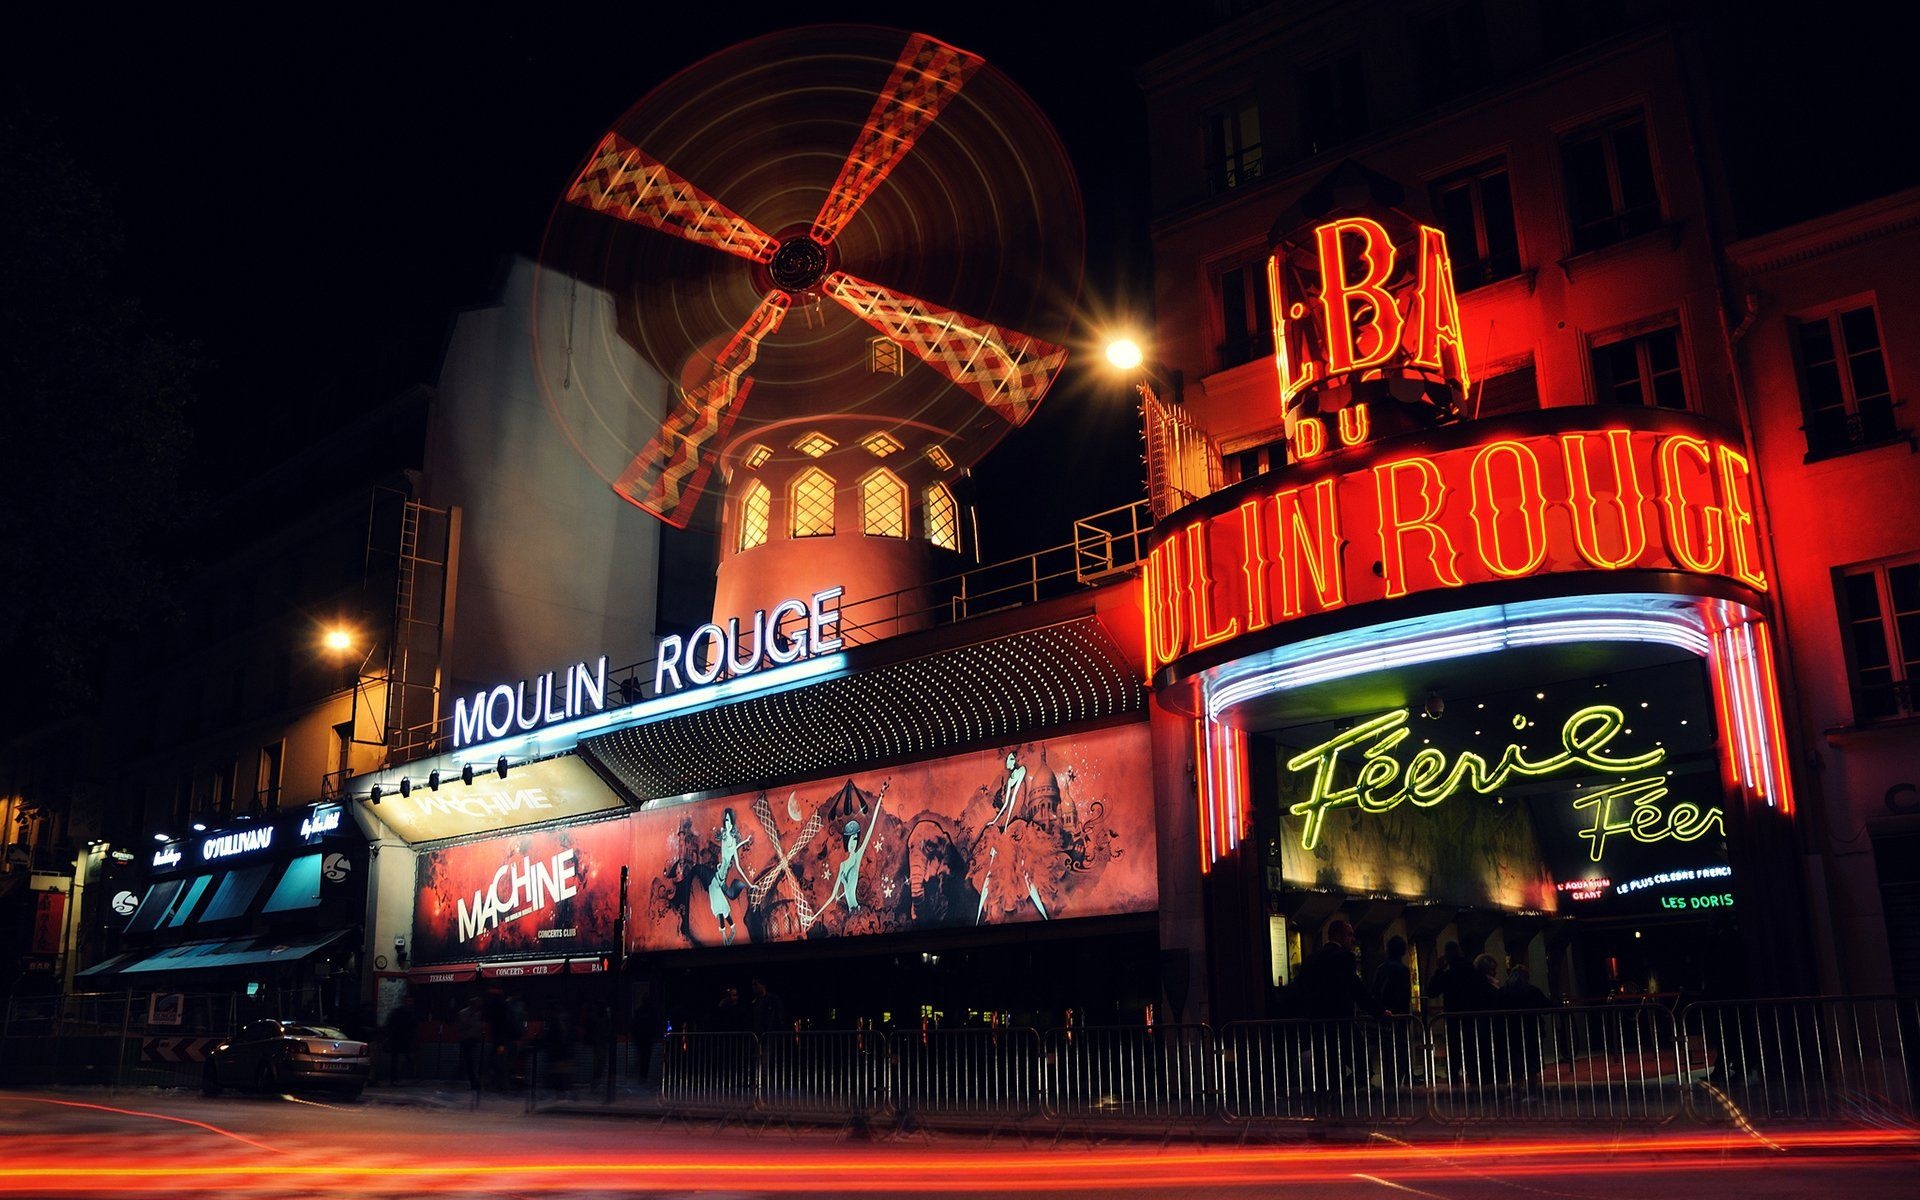 Cabaret: Moulin Rouge, Hot spot, Supper club, A restaurant with an alcohol drinks and a musical show. 1920x1200 HD Background.